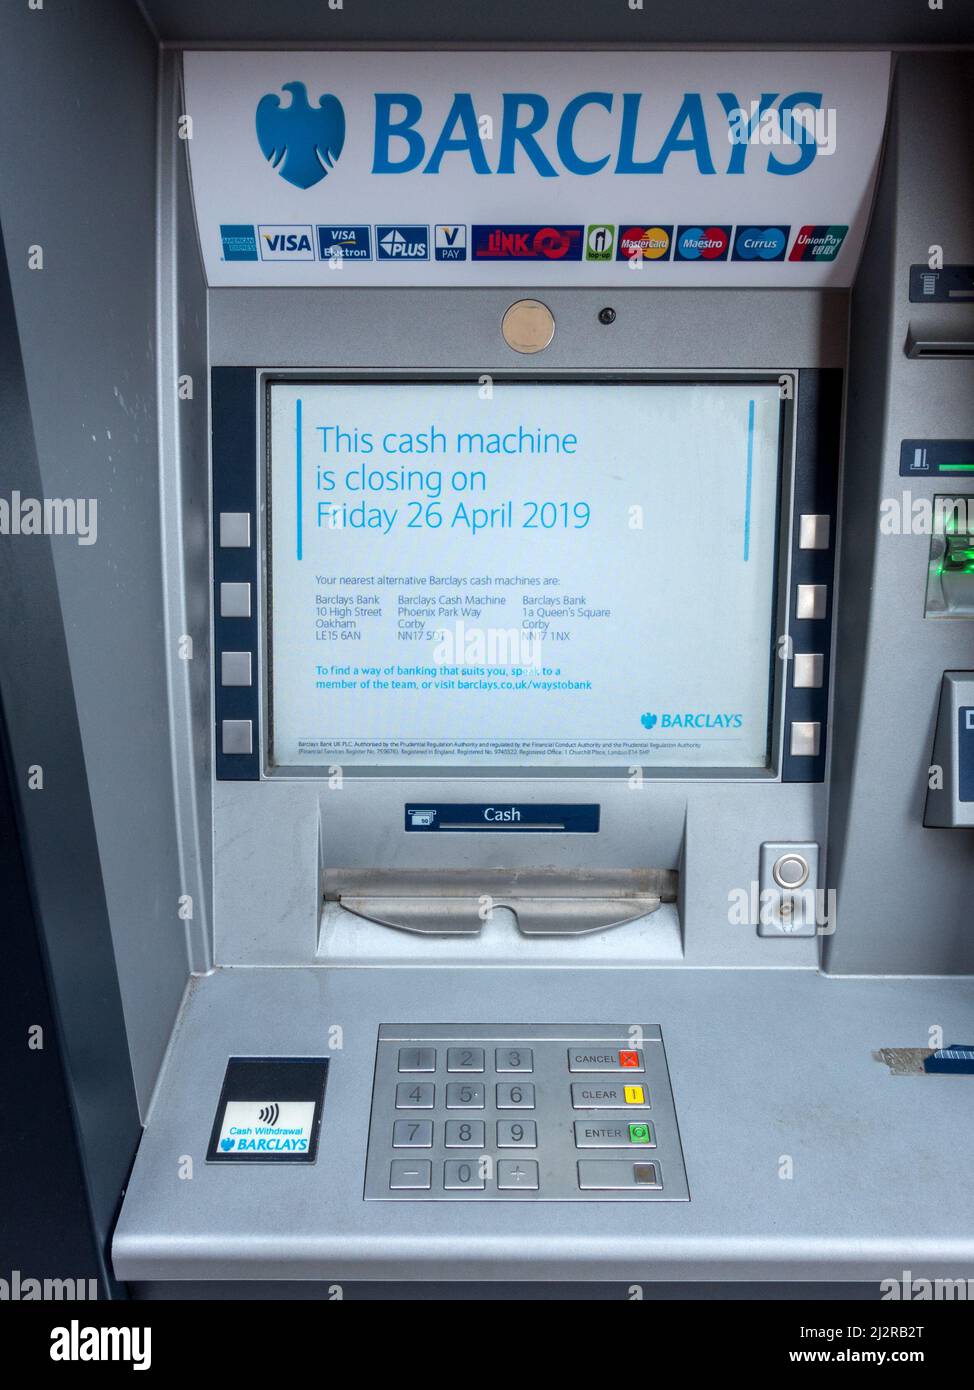 Barclays Bank cashpoint cash dispenser ATM showing message about forthcoming closure and removal, Uppingham, Rutland, UK Stock Photo